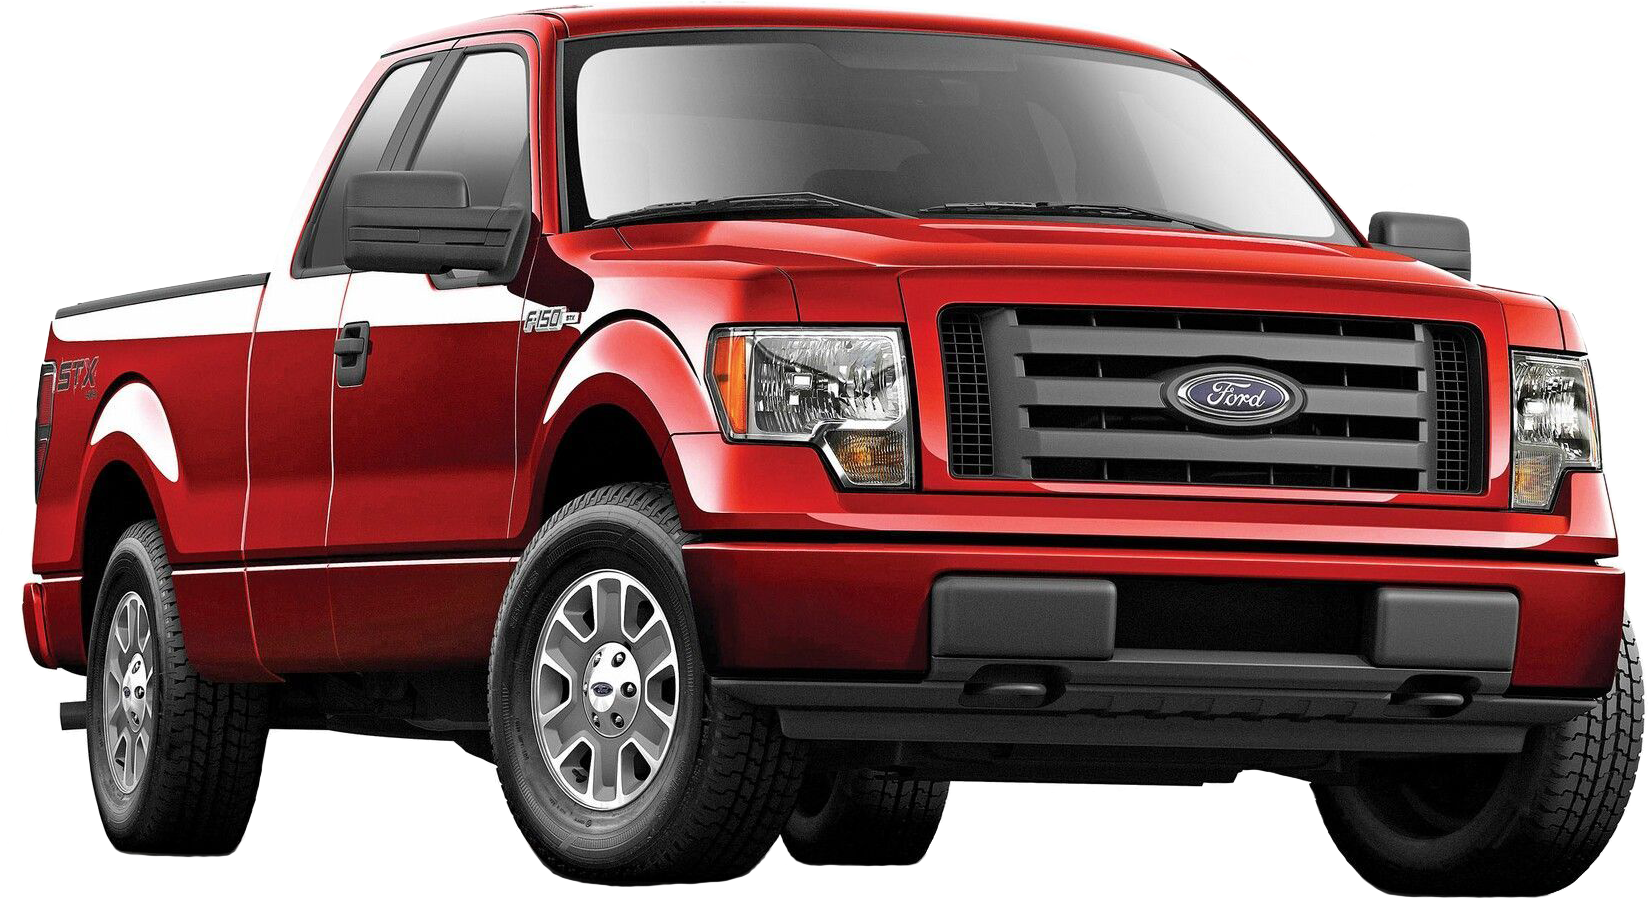 Pickup truck PNG Image